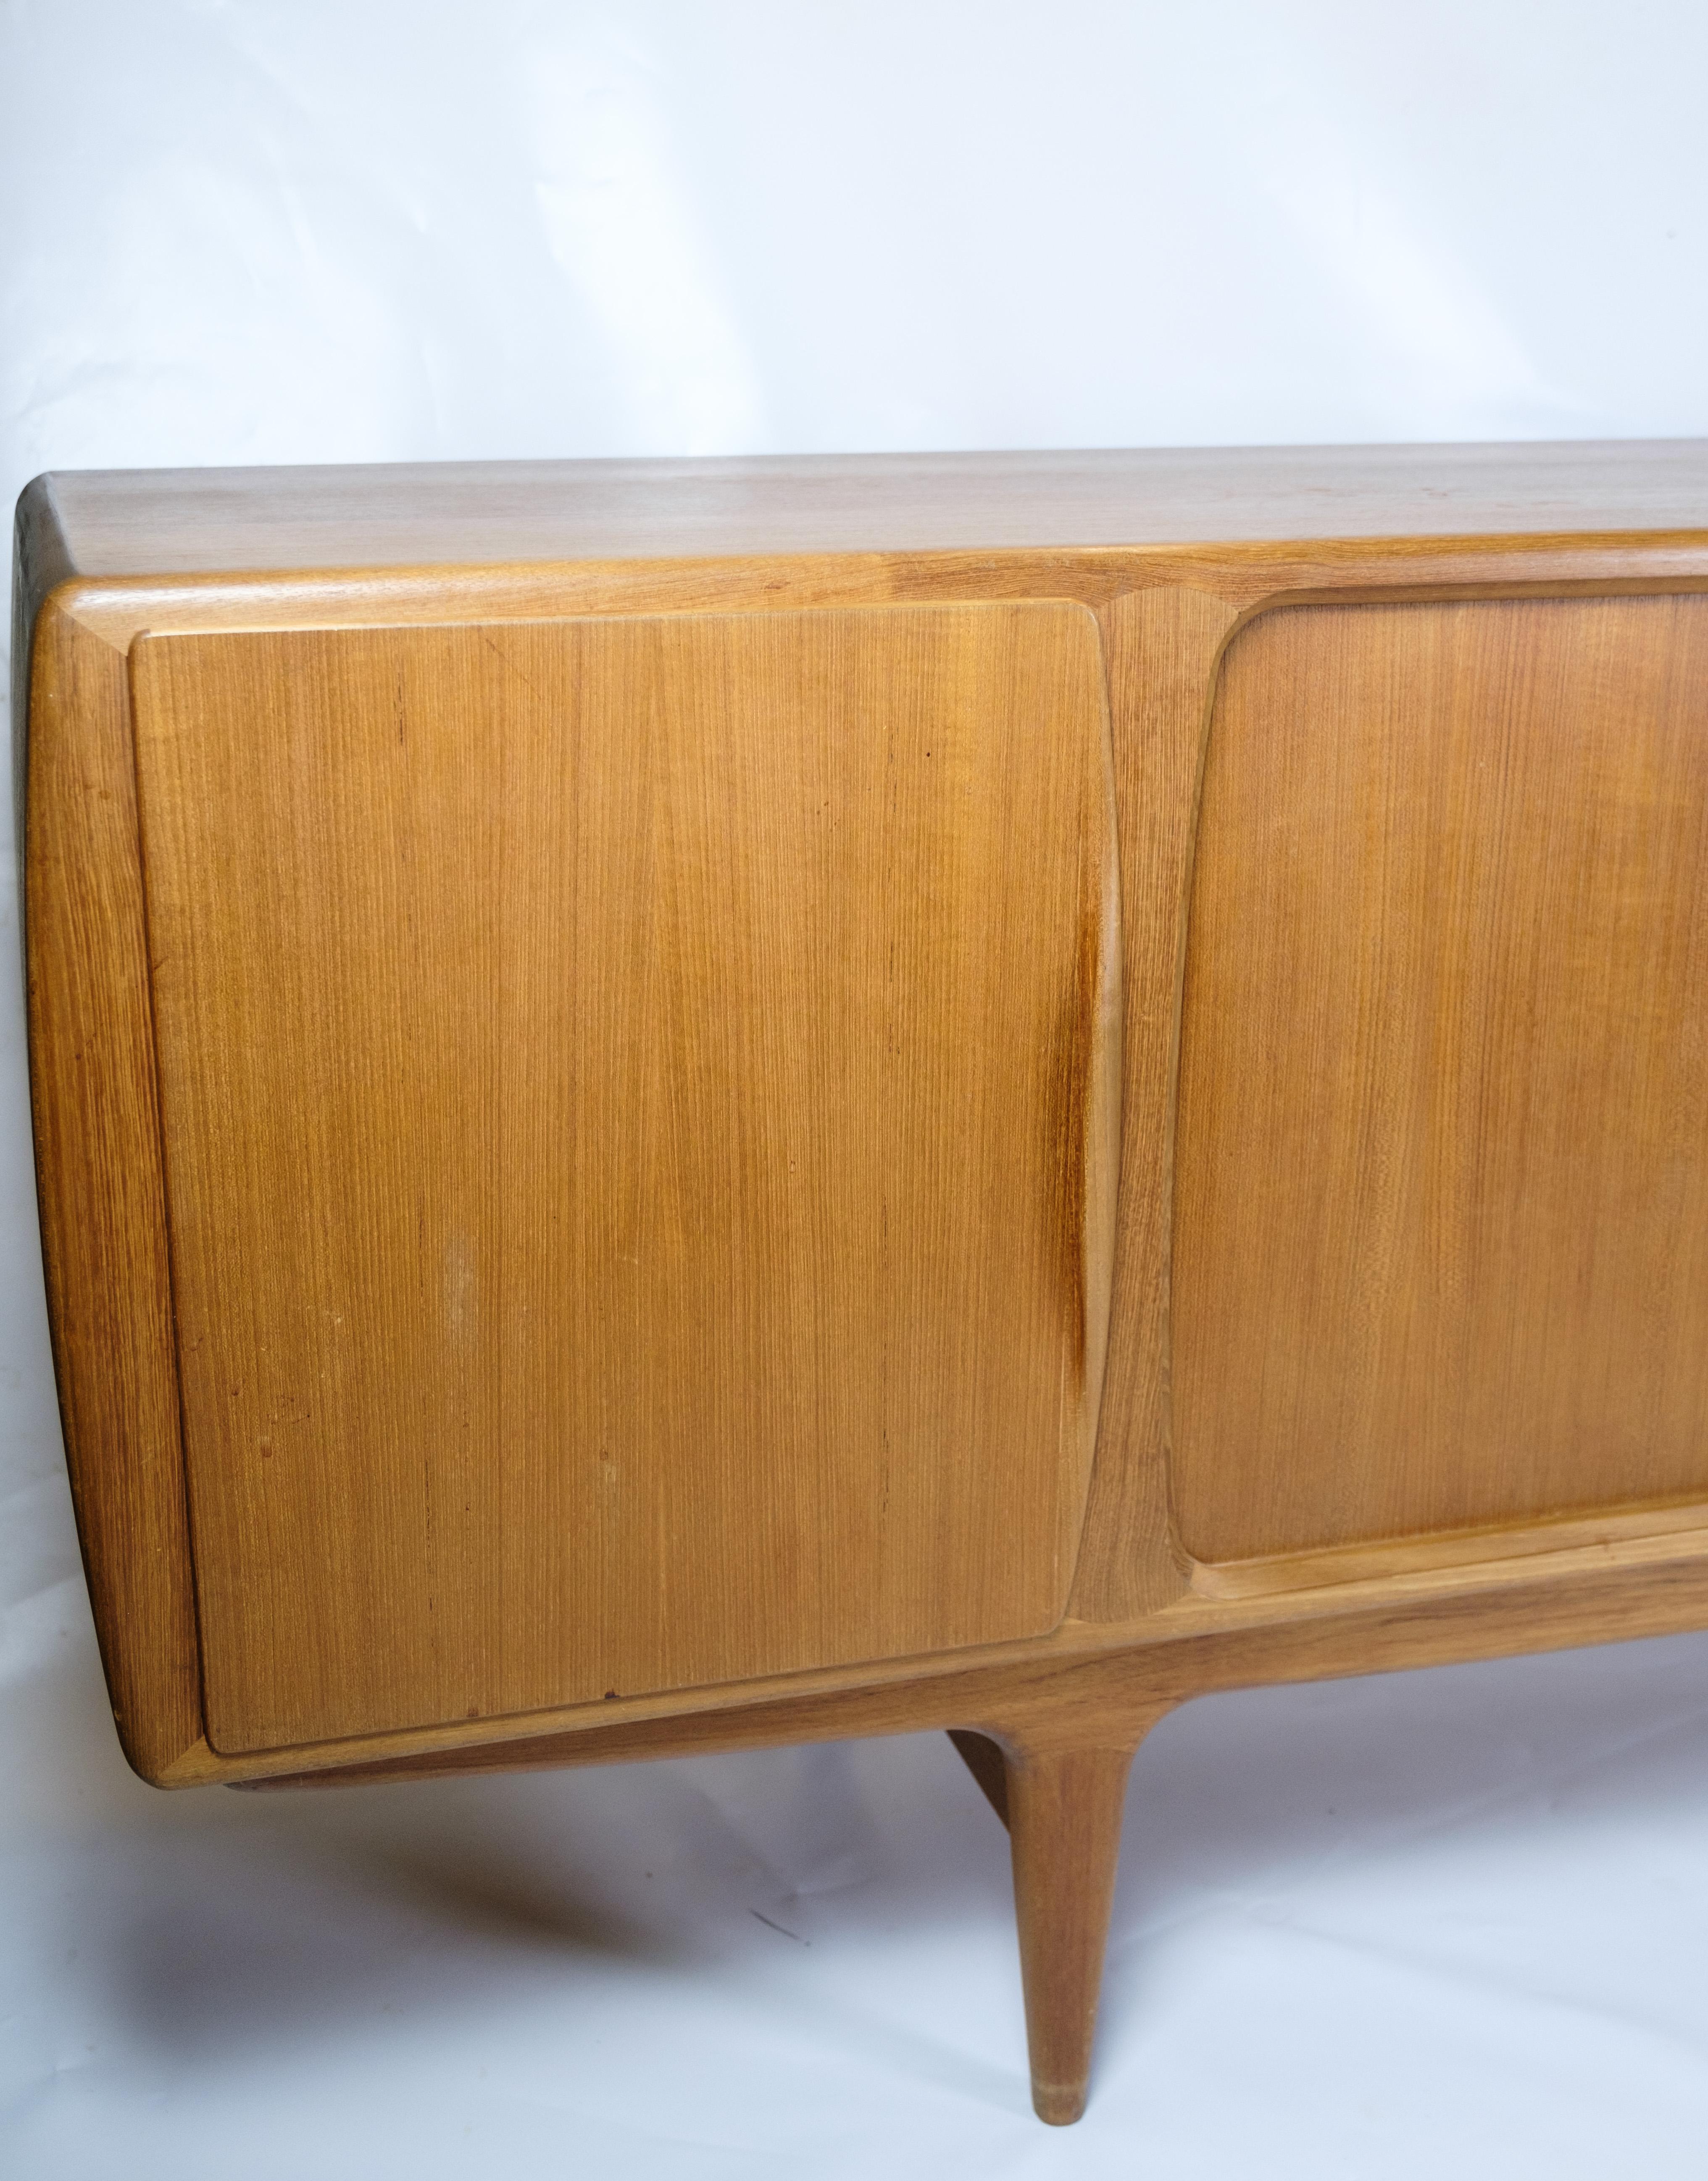 The sideboard with jalousie doors, designed by Johannes Andersen, Model 19 and manufactured by Uldum Møbelfabrik in 1960, represents a beautiful example of mid-20th century Danish furniture art.

Johannes Andersen was known for his talent for